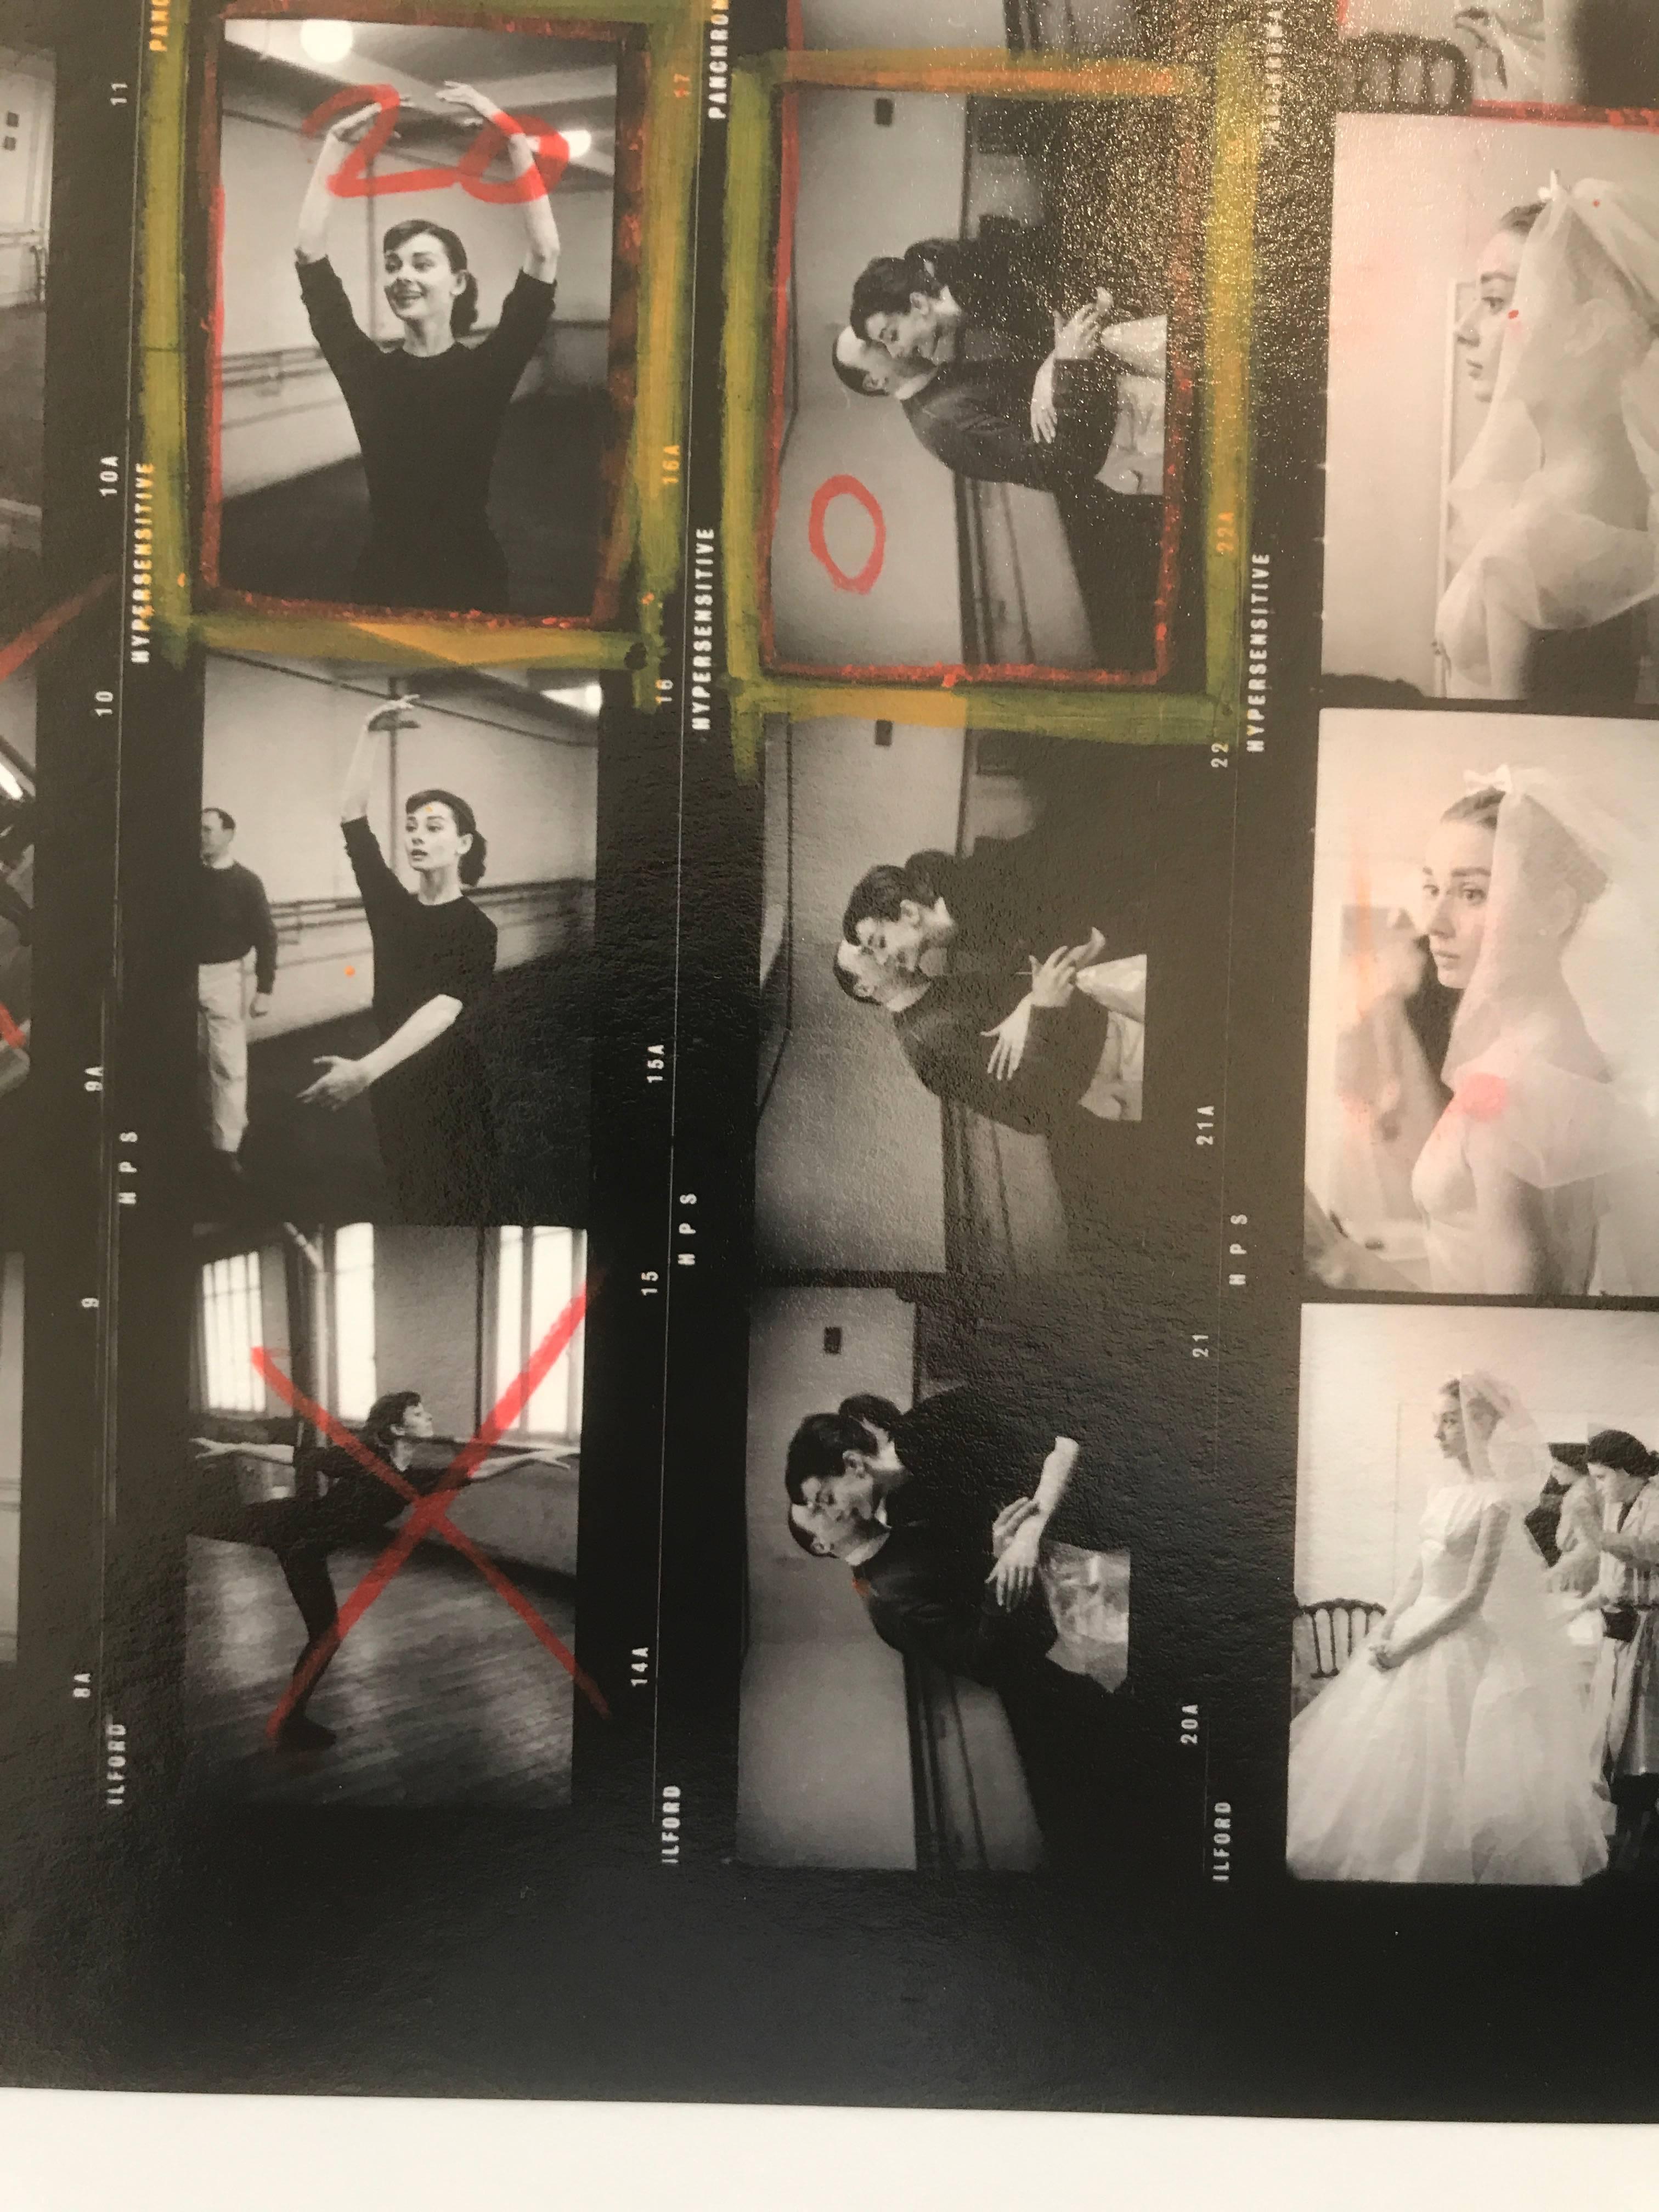 ' Audrey Hepburn Funny Face ' Contact Sheet MAGNUM
by David Seymour

Audrey Hepburn behind the scenes during the filming of American musical comedy 'Funny Face', a film released 1957. Photographed by David 'Chim' Seymour for Coronet Magazine while